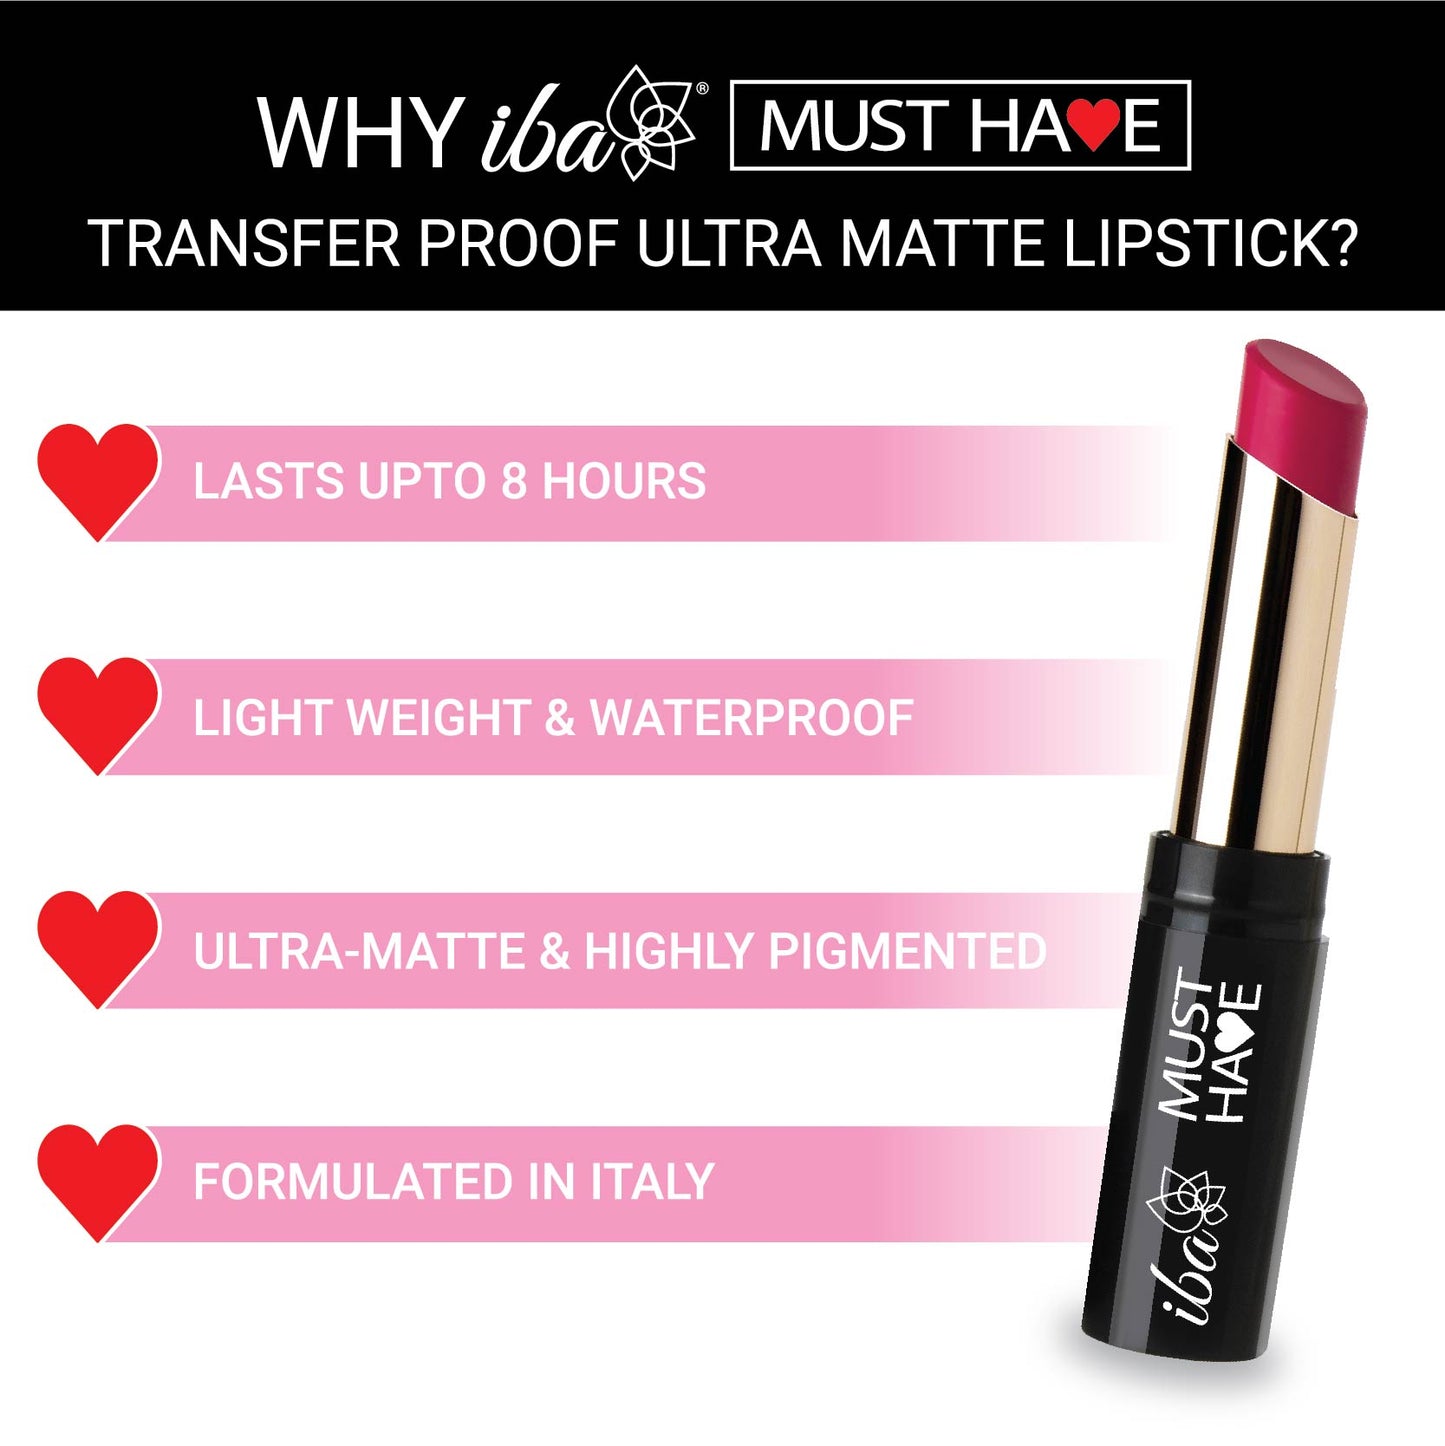 Iba Transfer Proof Lipstick Features